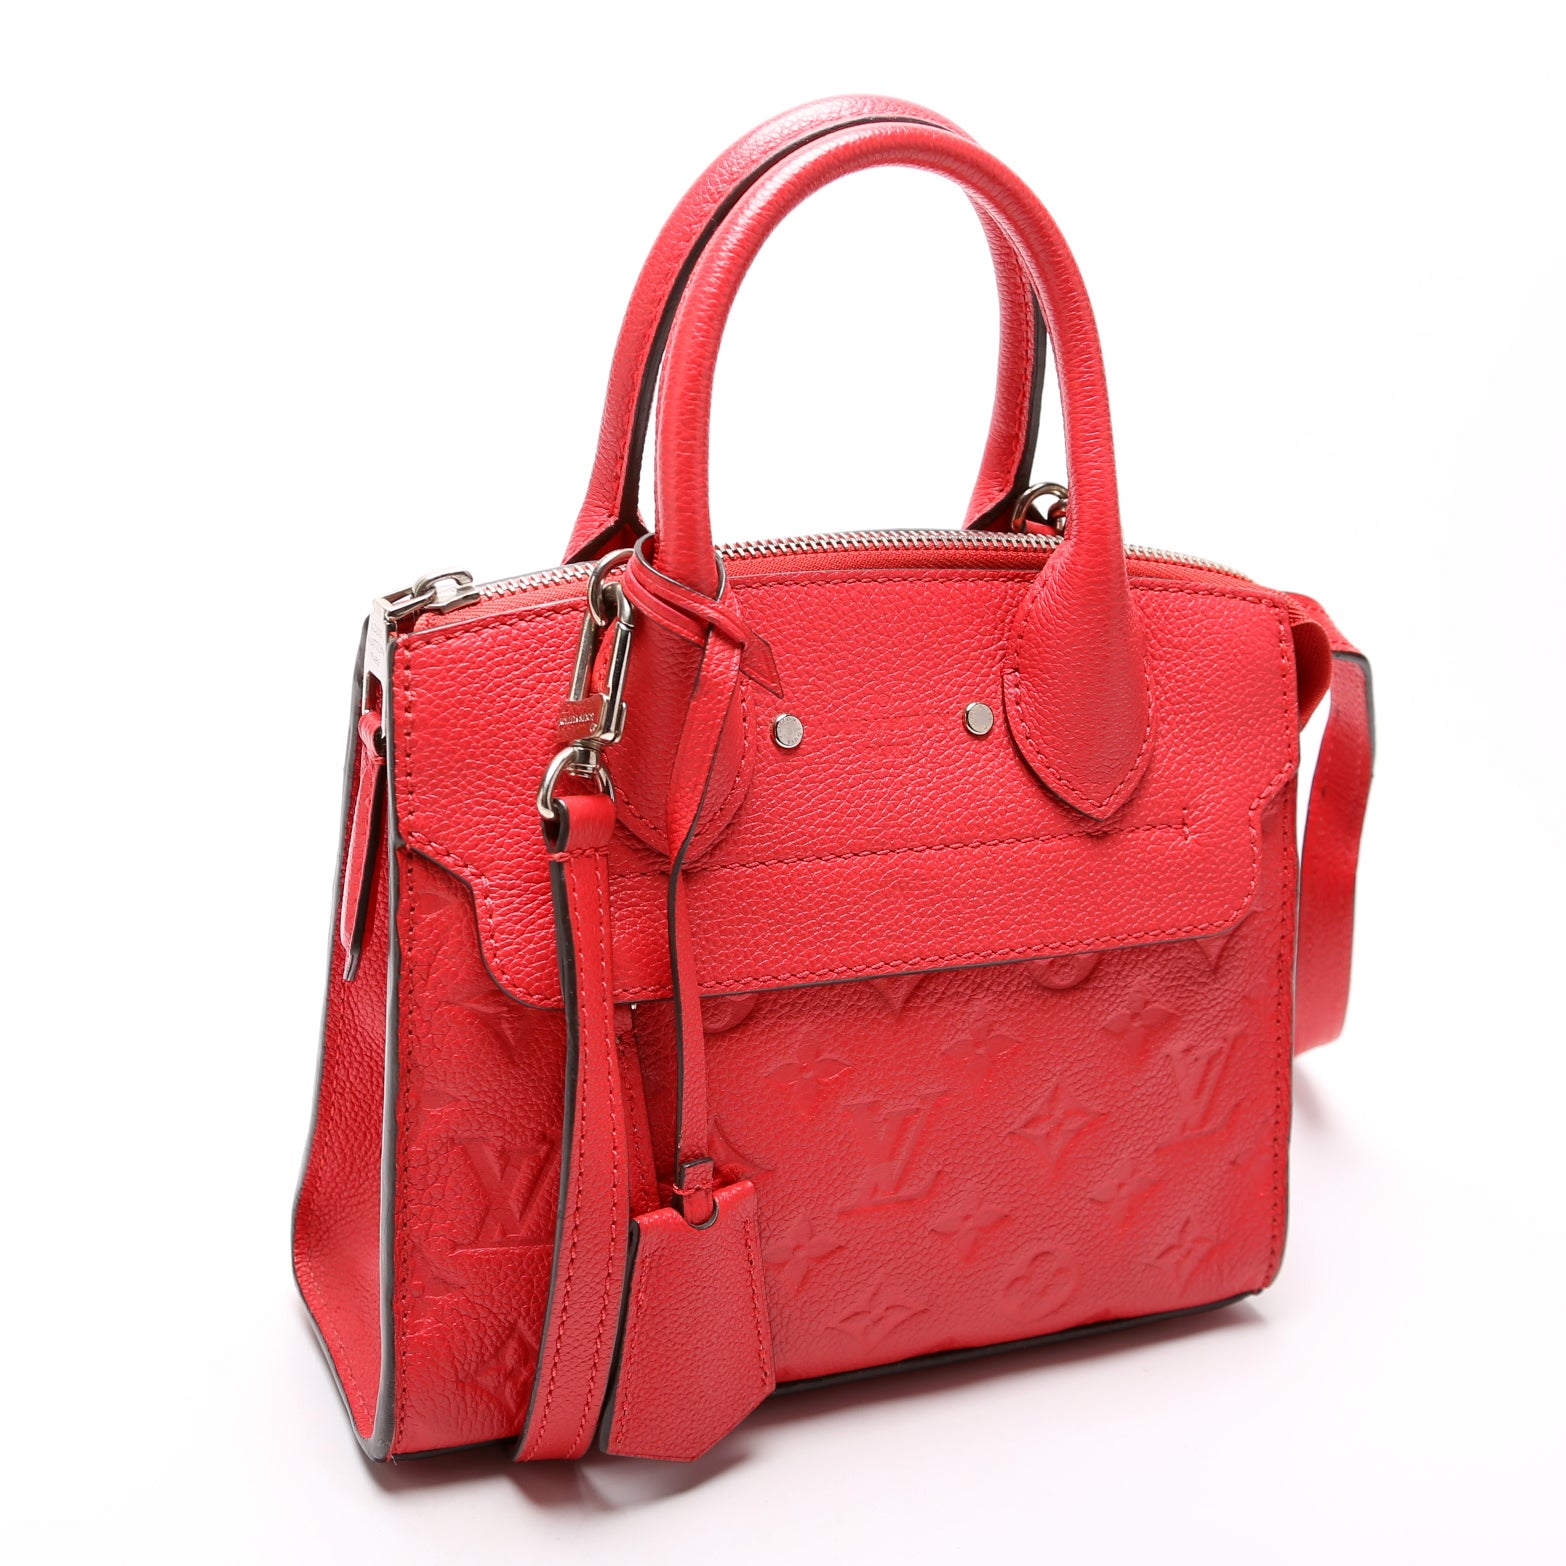 Pont Neuf bag in pink imprint leather Louis Vuitton - Second Hand